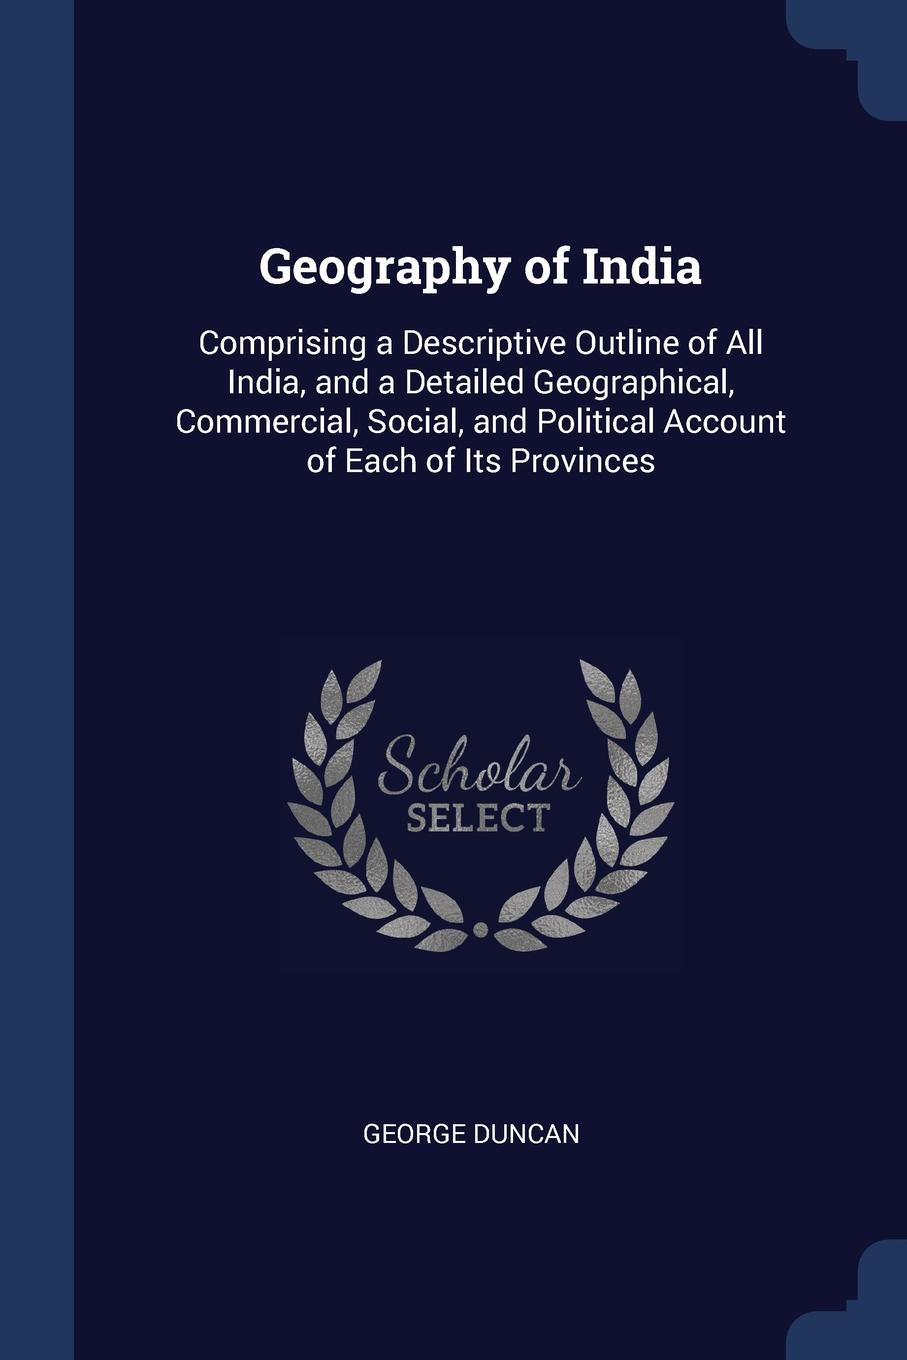 Geography of India. Comprising a Descriptive Outline of All India, and a Detailed Geographical, Commercial, Social, and Political Account of Each of Its Provinces